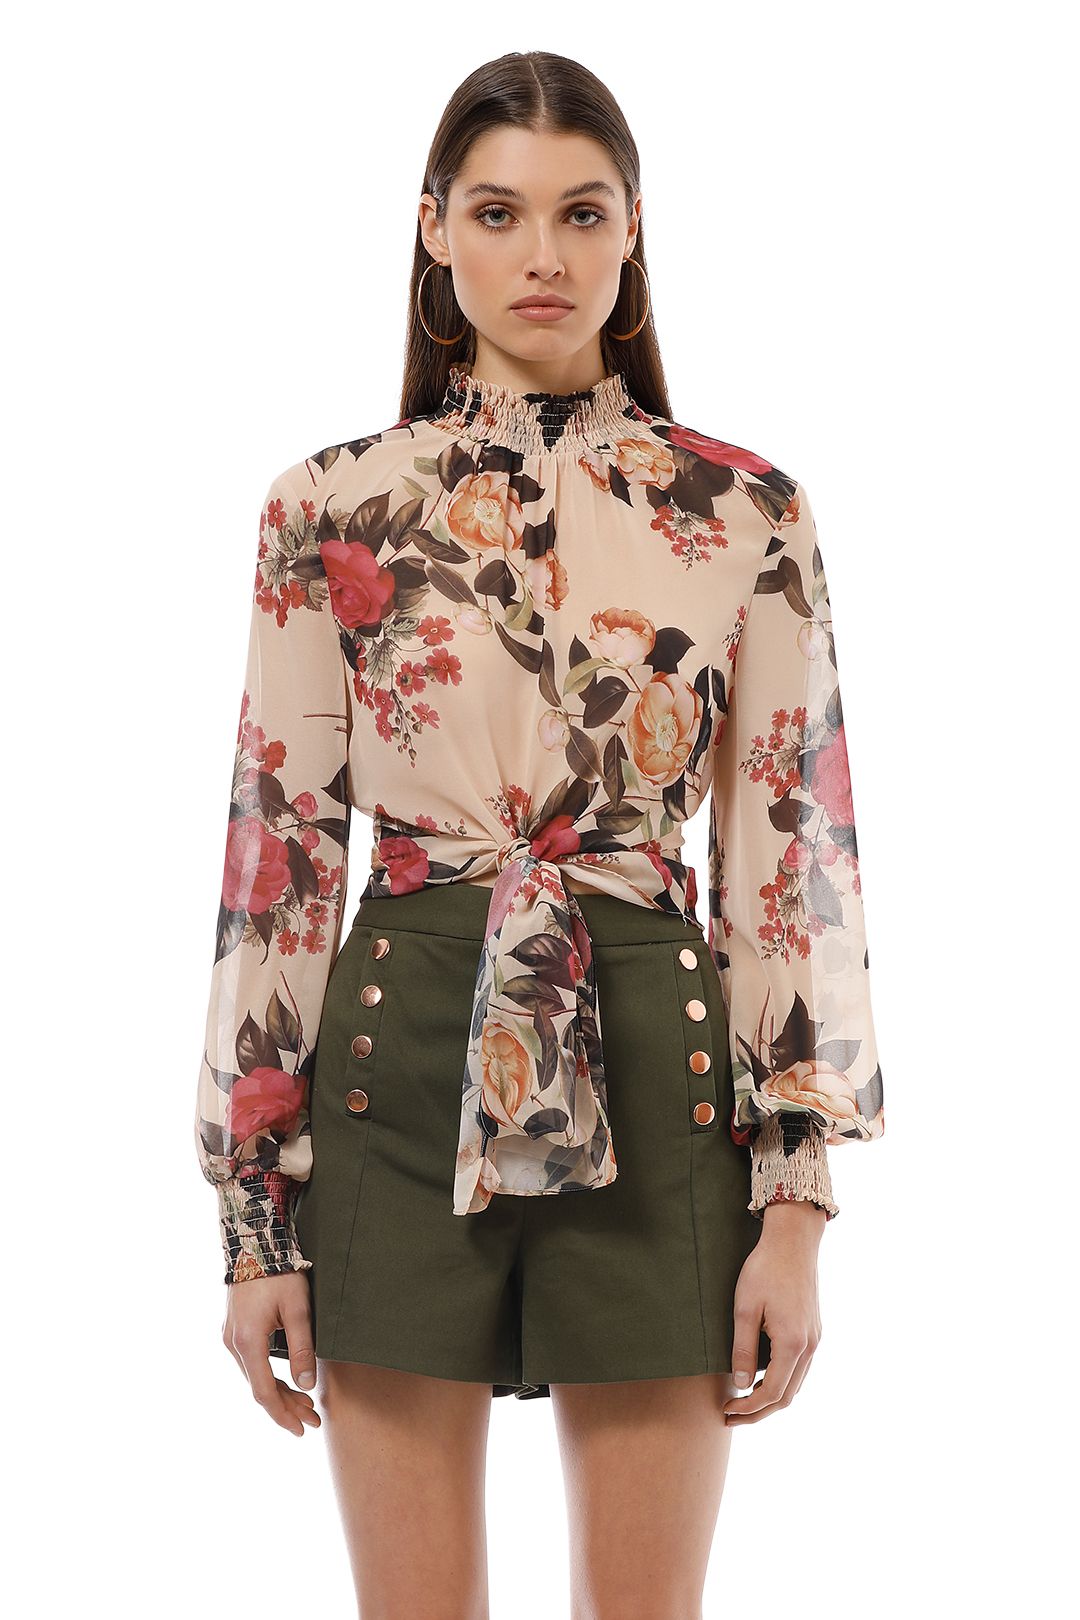 Sheike - Billy Blouse - Cream Floral - Front Crop